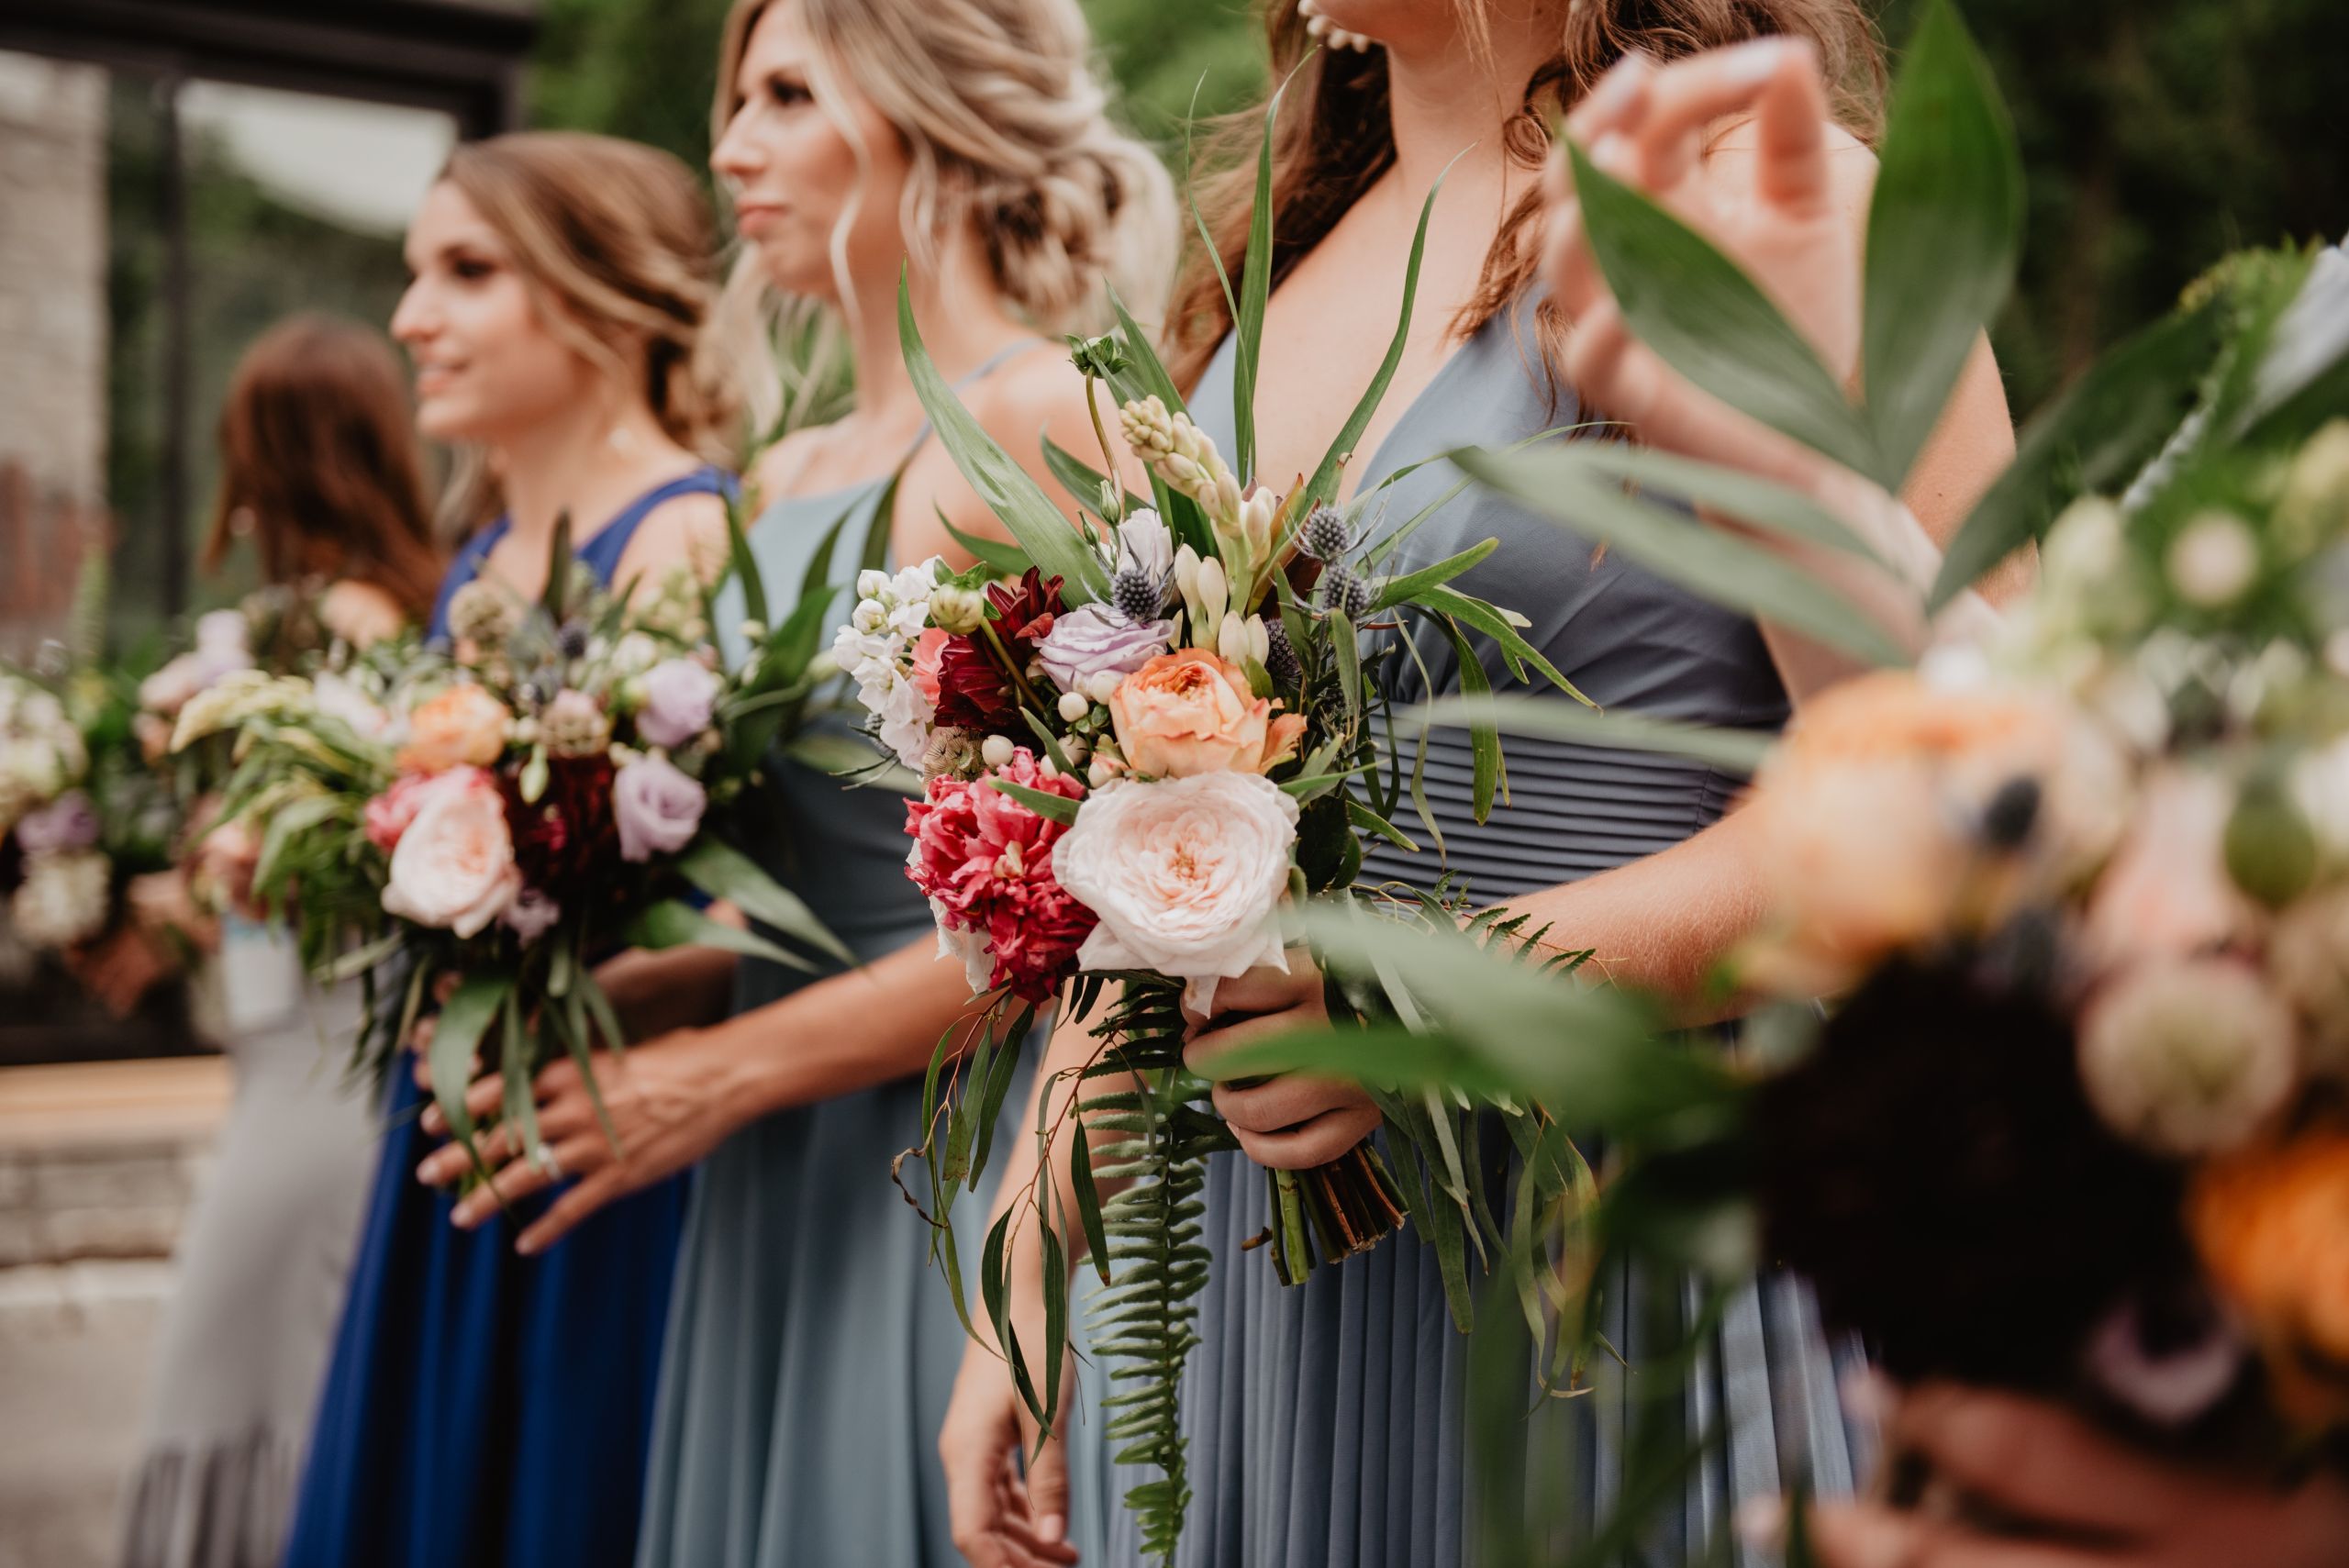 Photography of a group of friends holding wedding bouquets